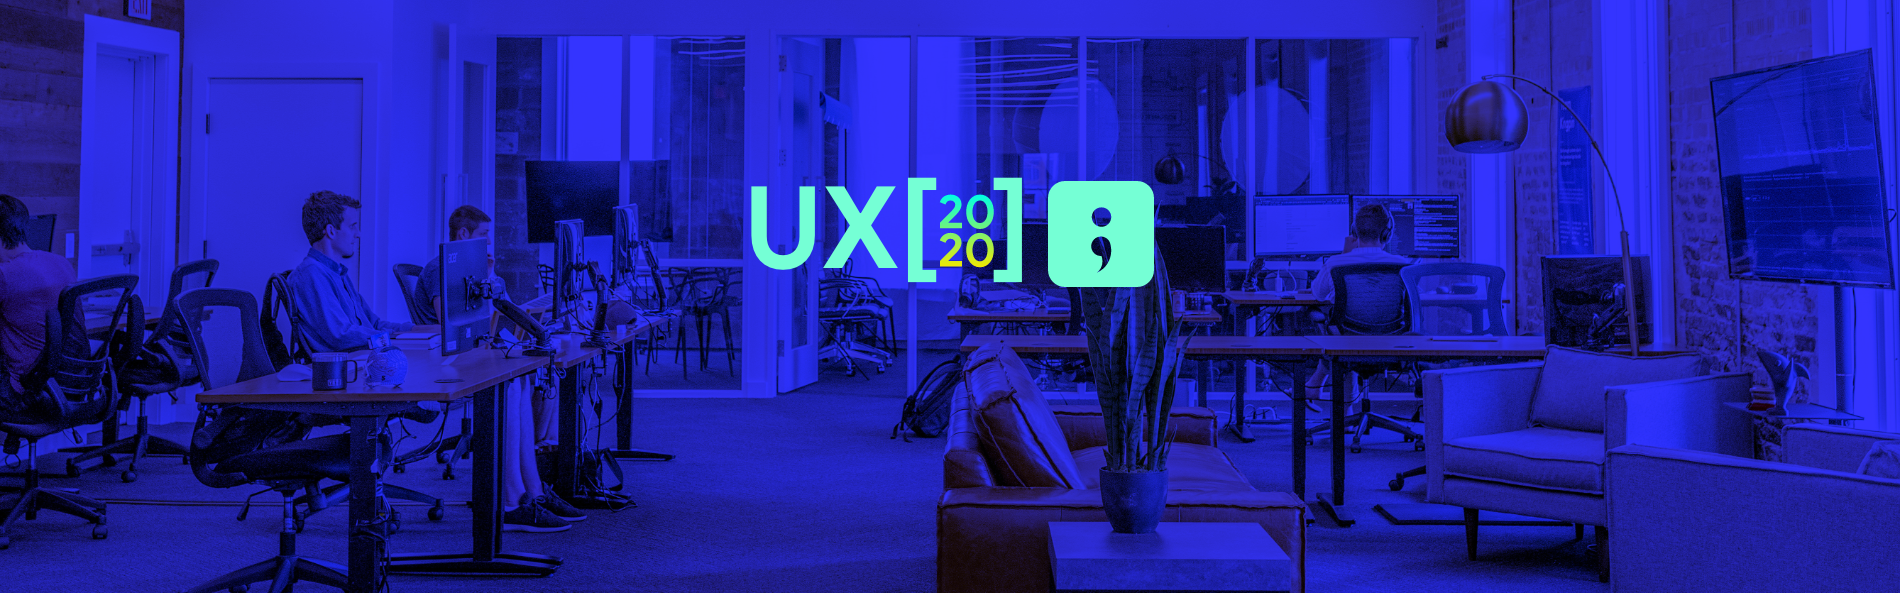 How To Choose User Experience Design Agency In 2021?